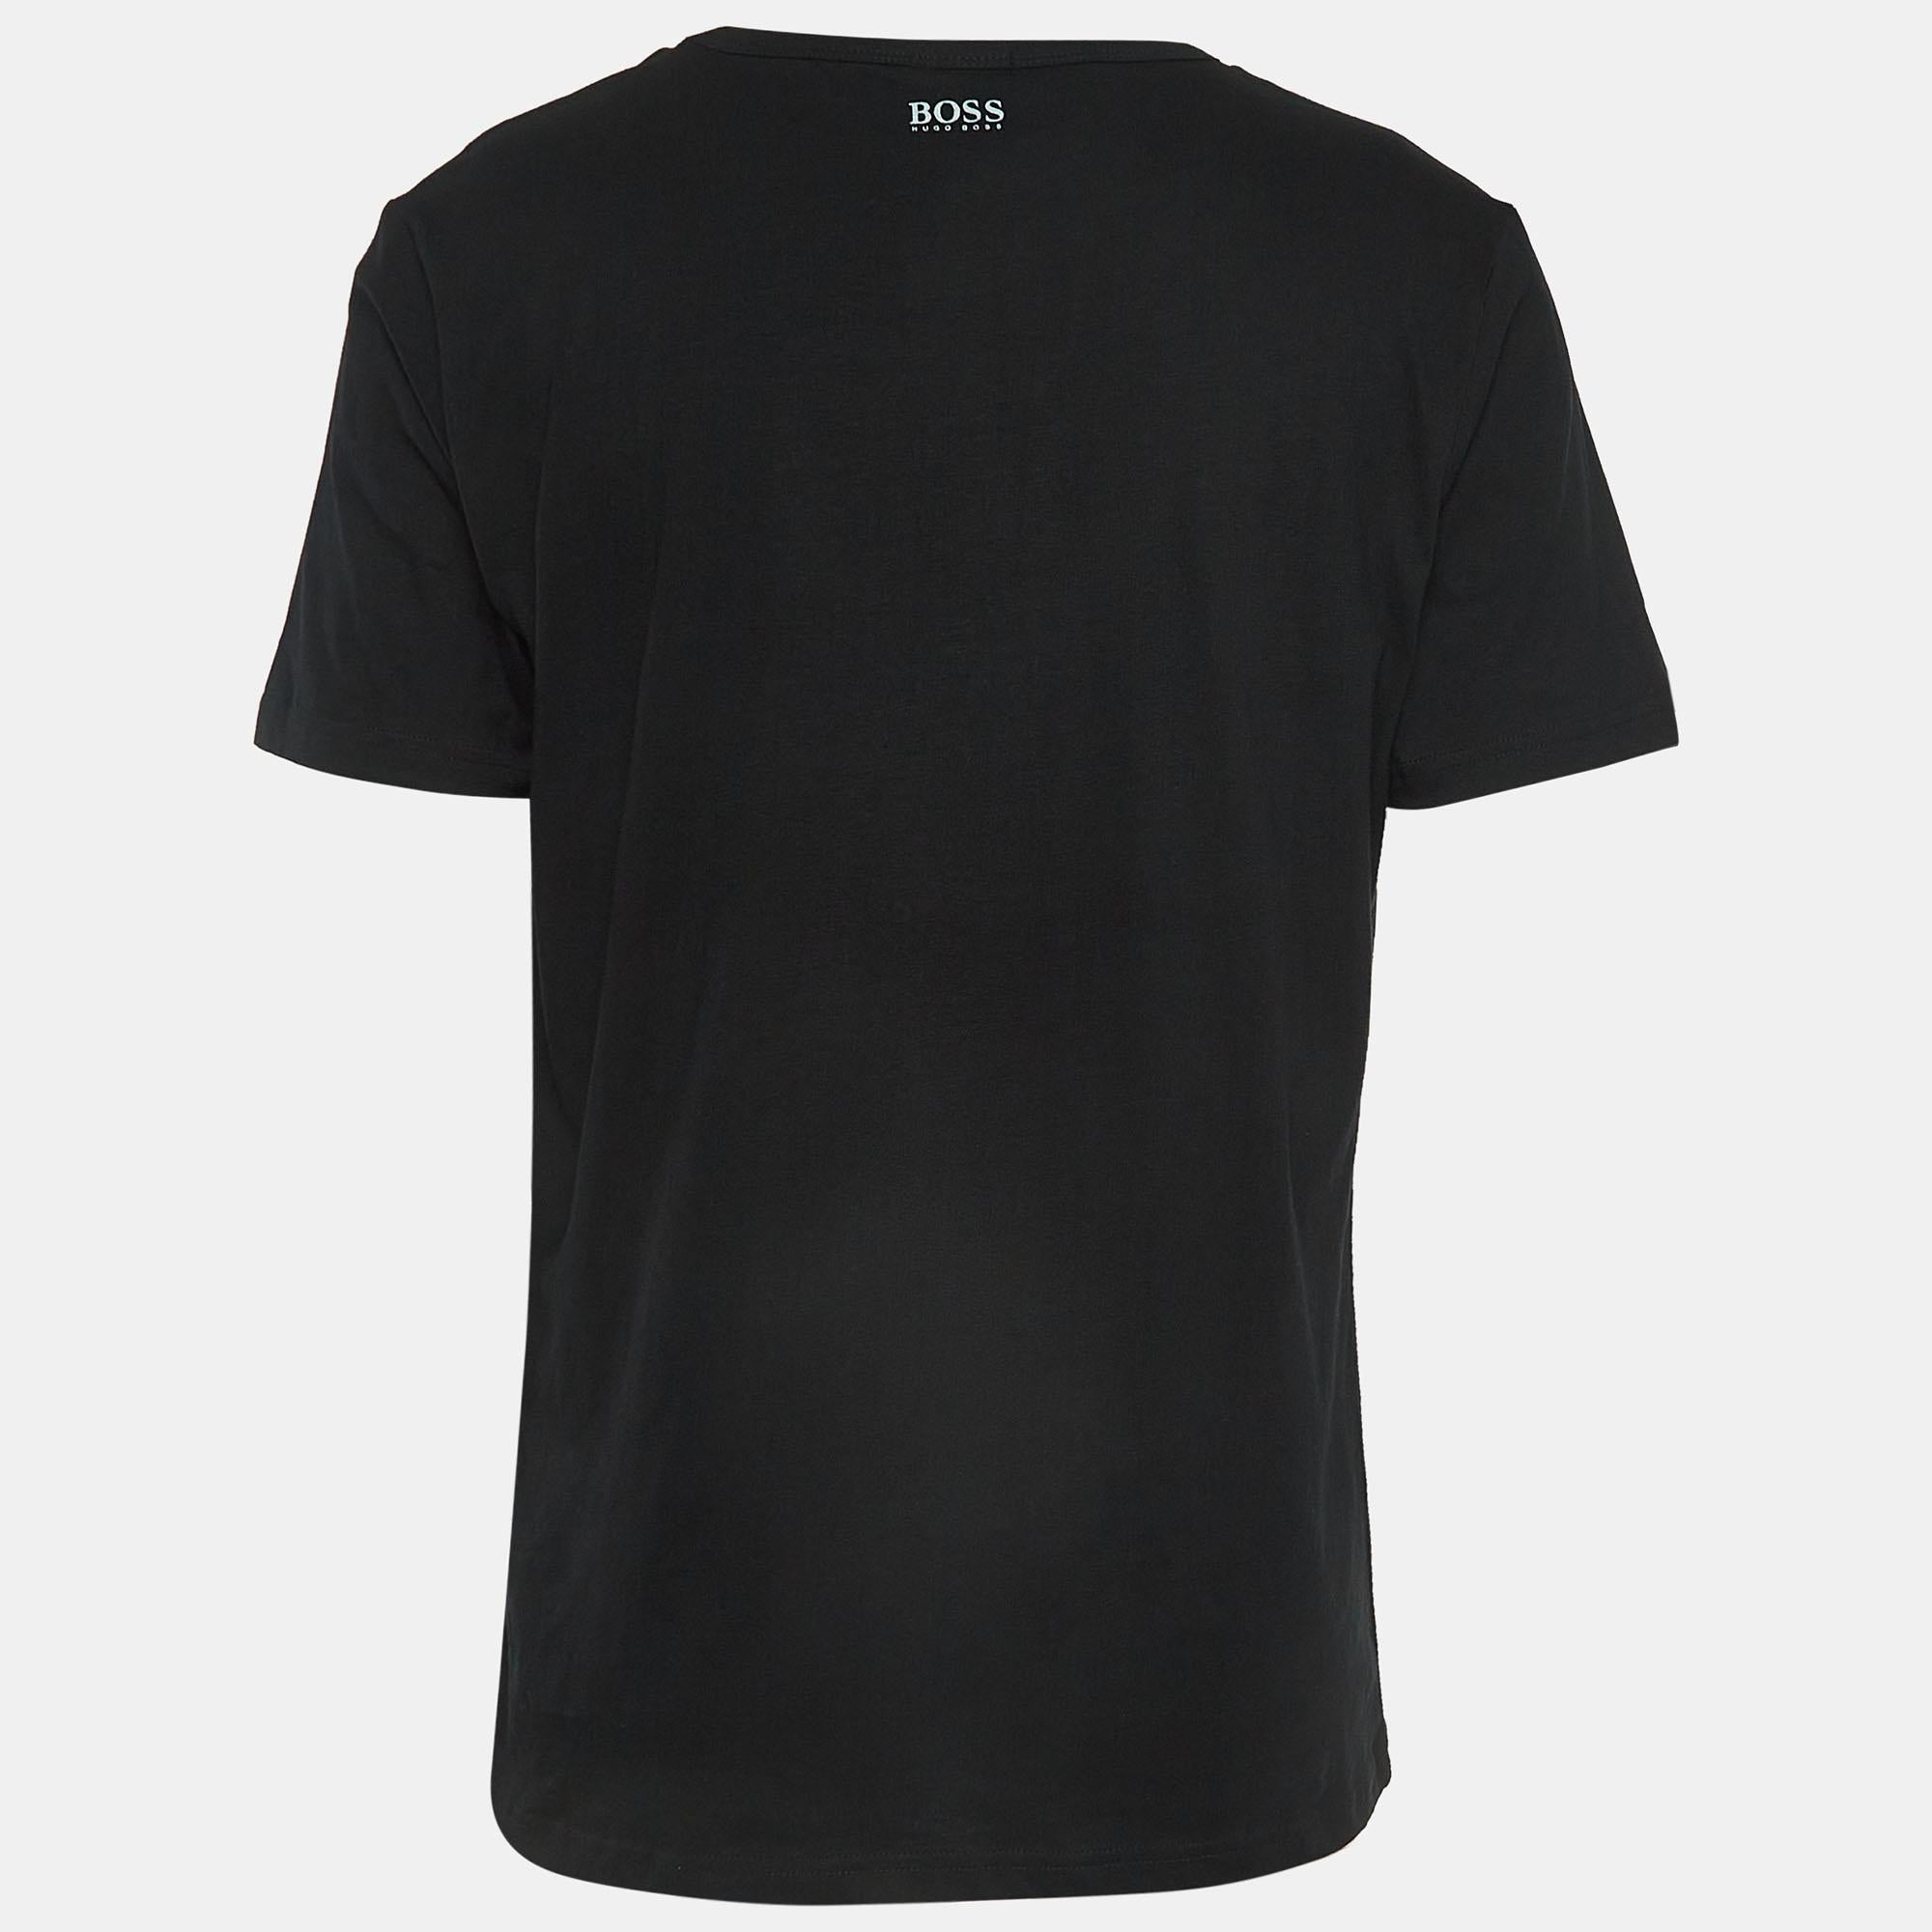 Elevate your everyday style with this meticulously crafted T-shirt. Impeccable tailoring ensures a perfect fit, while the breathable fabric offers unparalleled ease. The creation fuses fashion and comfort seamlessly.

Includes
Brand Tag